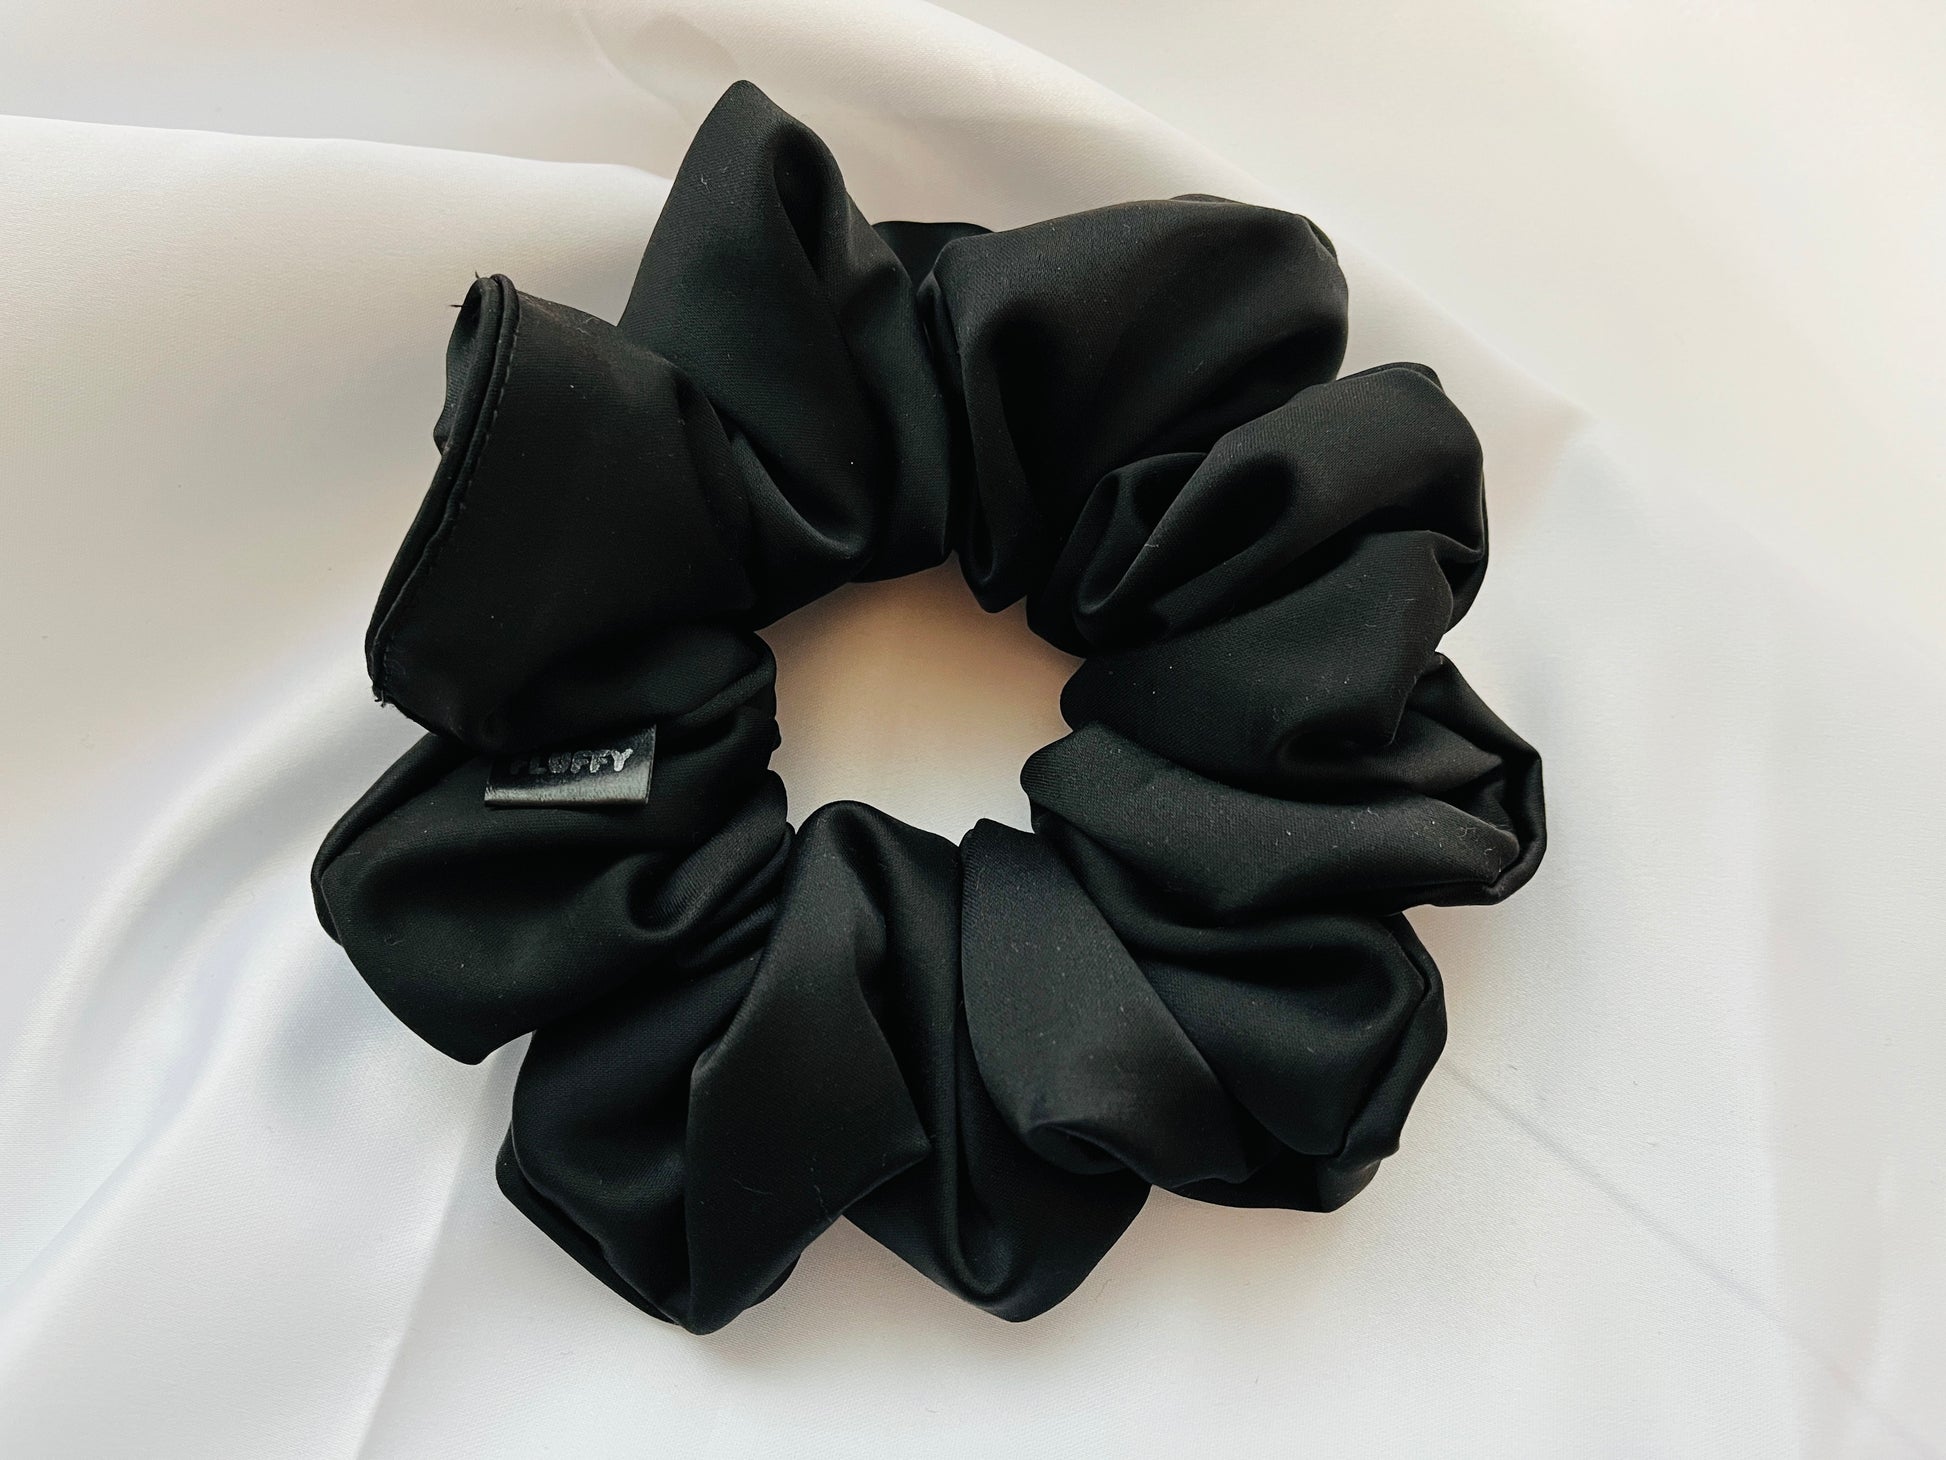 Black Satin Scrunchie Stylish and durable. You are seeing our satin scrunchies in 3 sizes..  The sizes of our Satin Scrunchies are Large, Medium and Mini.  Simply select the size you want in the drop down menu and add them to the card.   Our Satin Scrunchies are perfect for all hair types and every person. We have multiple colors and sizes available